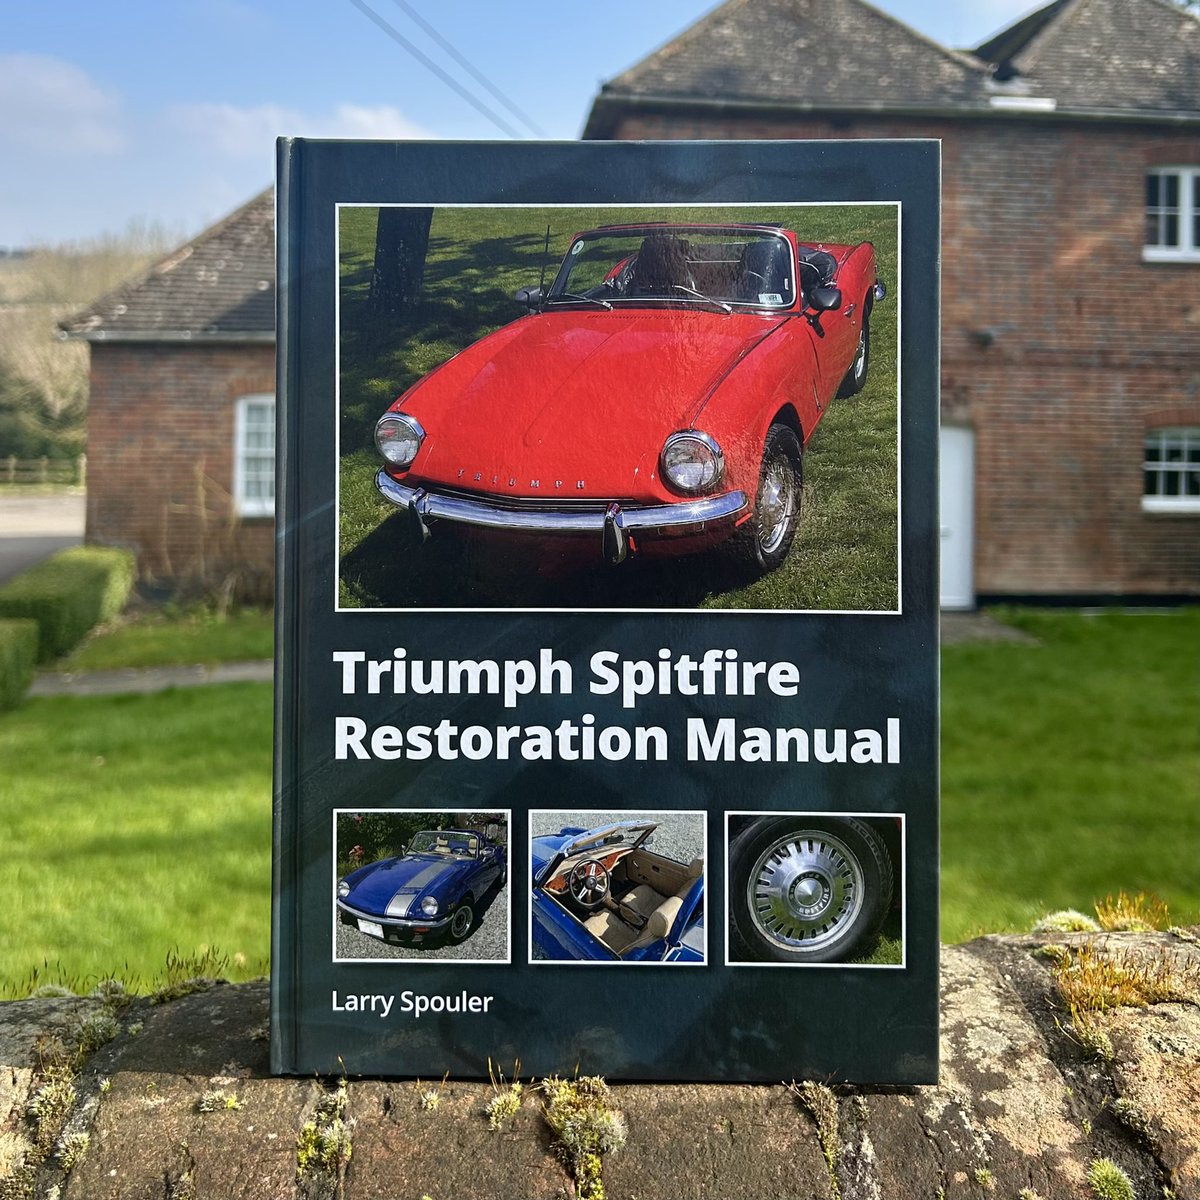 Introducing the Triumph Spitfire Restoration Manual by Larry Spouler. 🔧 The Triumph Spitfire Restoration Manual is for anyone who has a keen interest in owning a Triumph Spitfire but has limited mechanical experience. #crowood #thecrowoodrpress #triumphspitfire